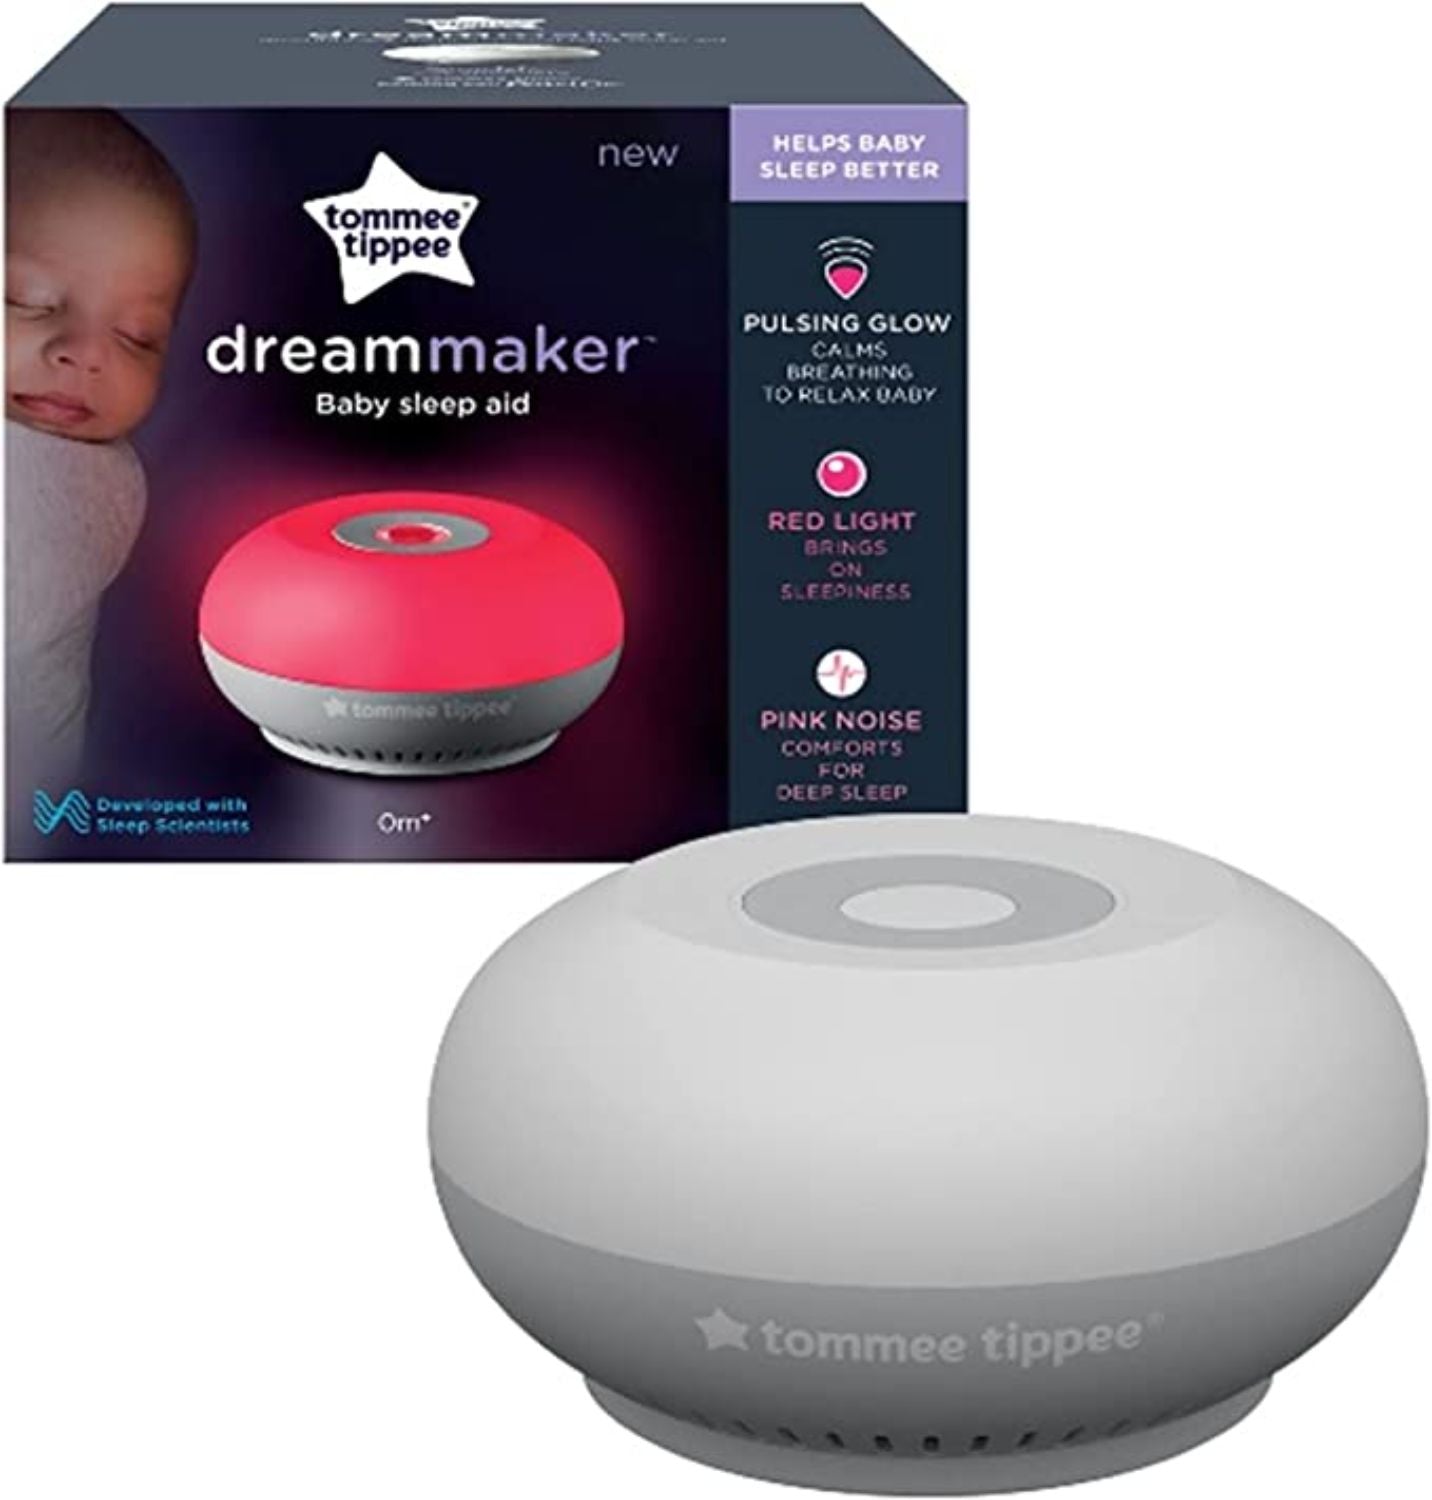 Tommee Tippee Dreammaker Baby Sleep Aid, Pink Noise, Red Light Night Light, Scientifically Proven, Intelligent CrySensor